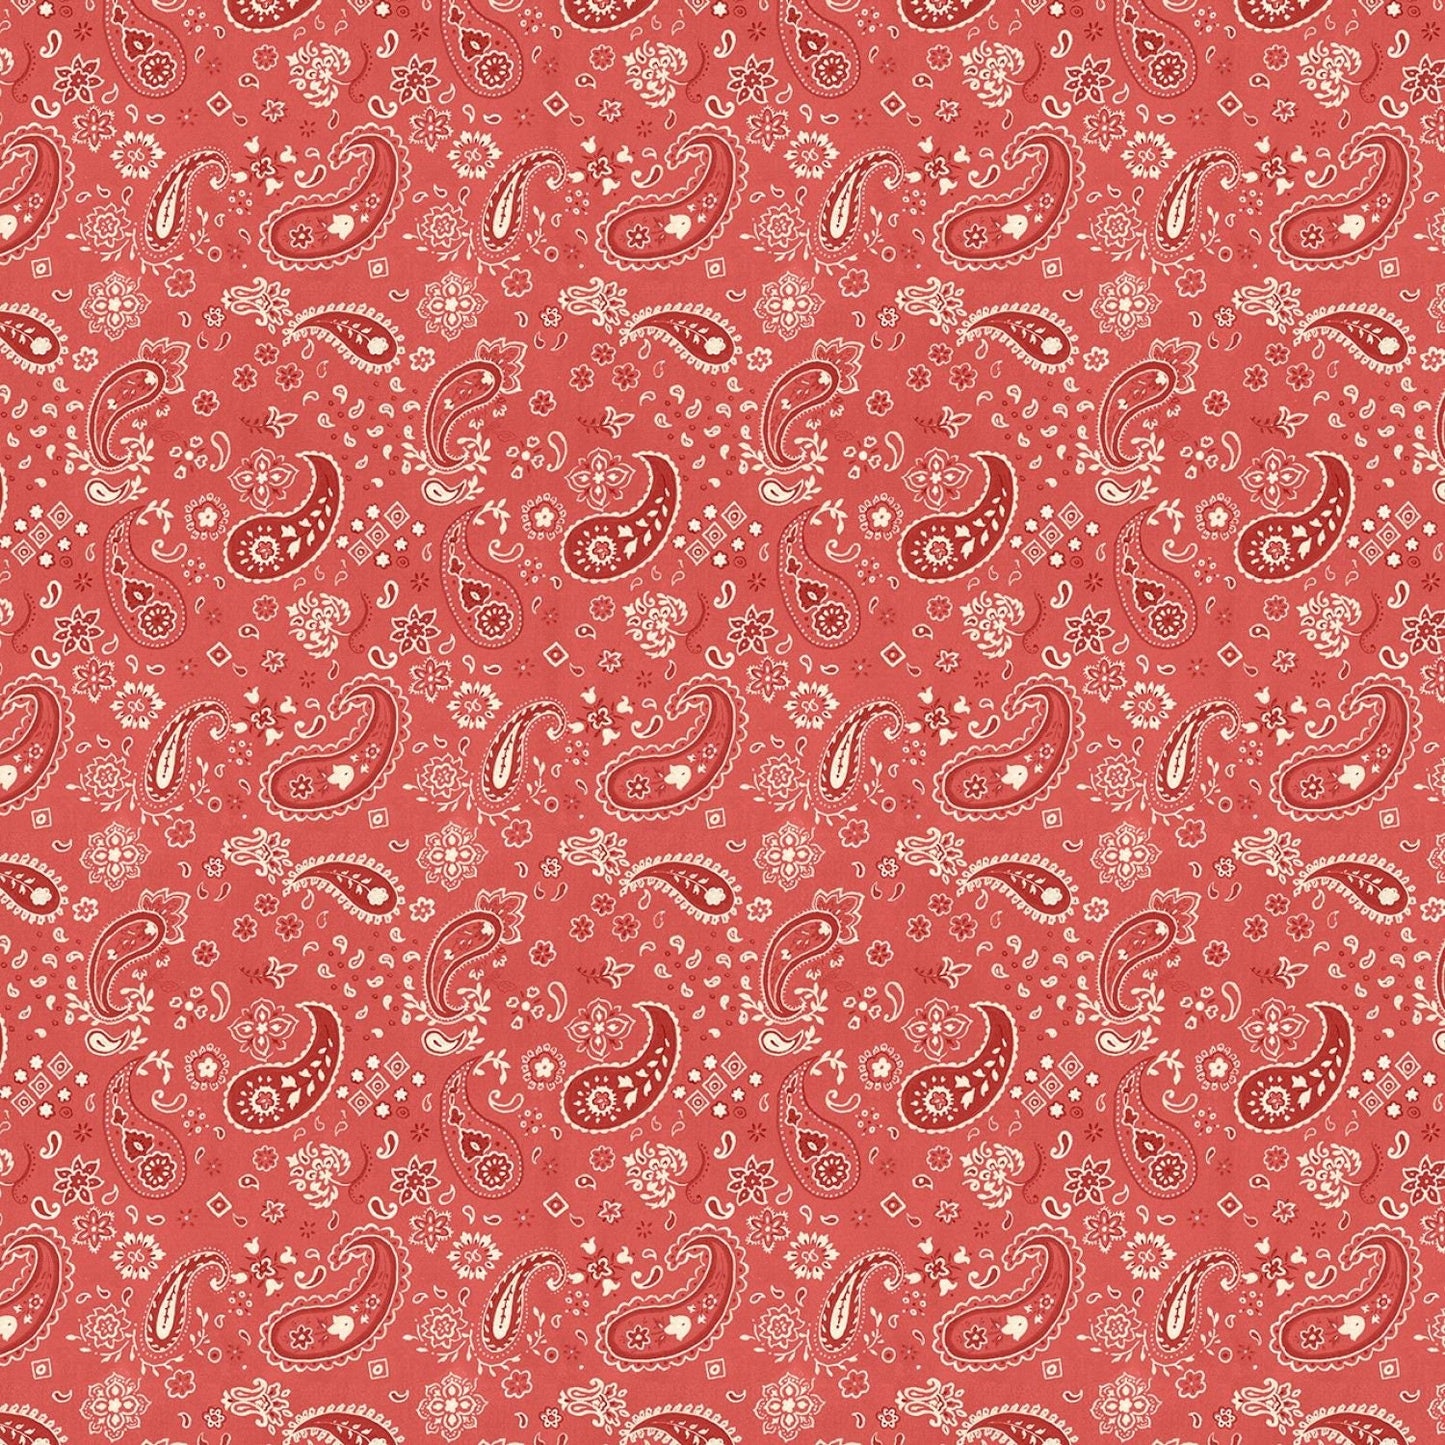 Homemade Happiness by Danhui Nai Paisley Red 89232-332 Cotton Woven Fabric